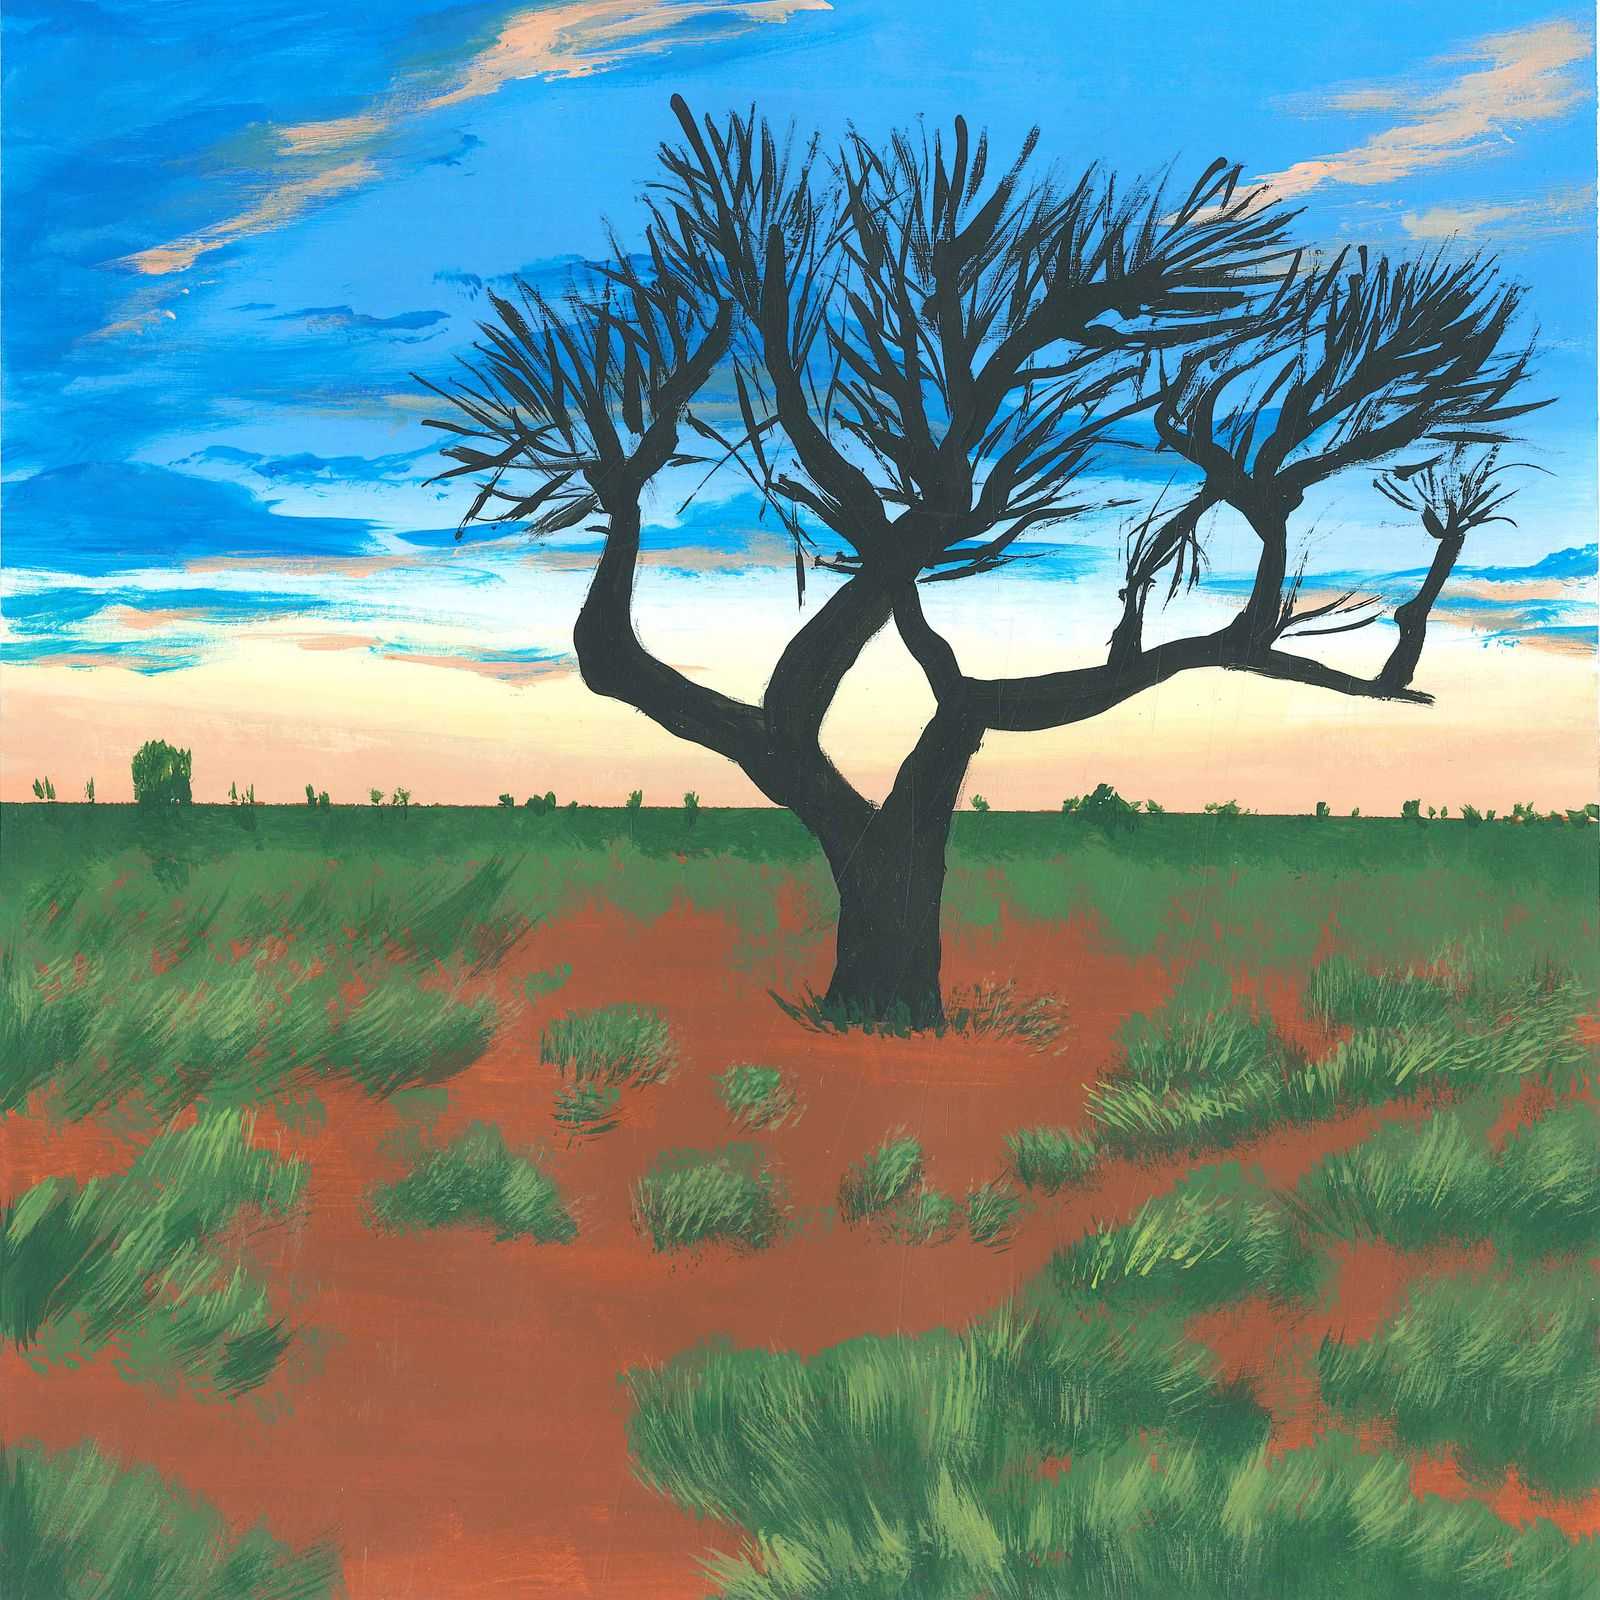 Dry Creek Bed in the Outback - nature landscape painting - earth.fm